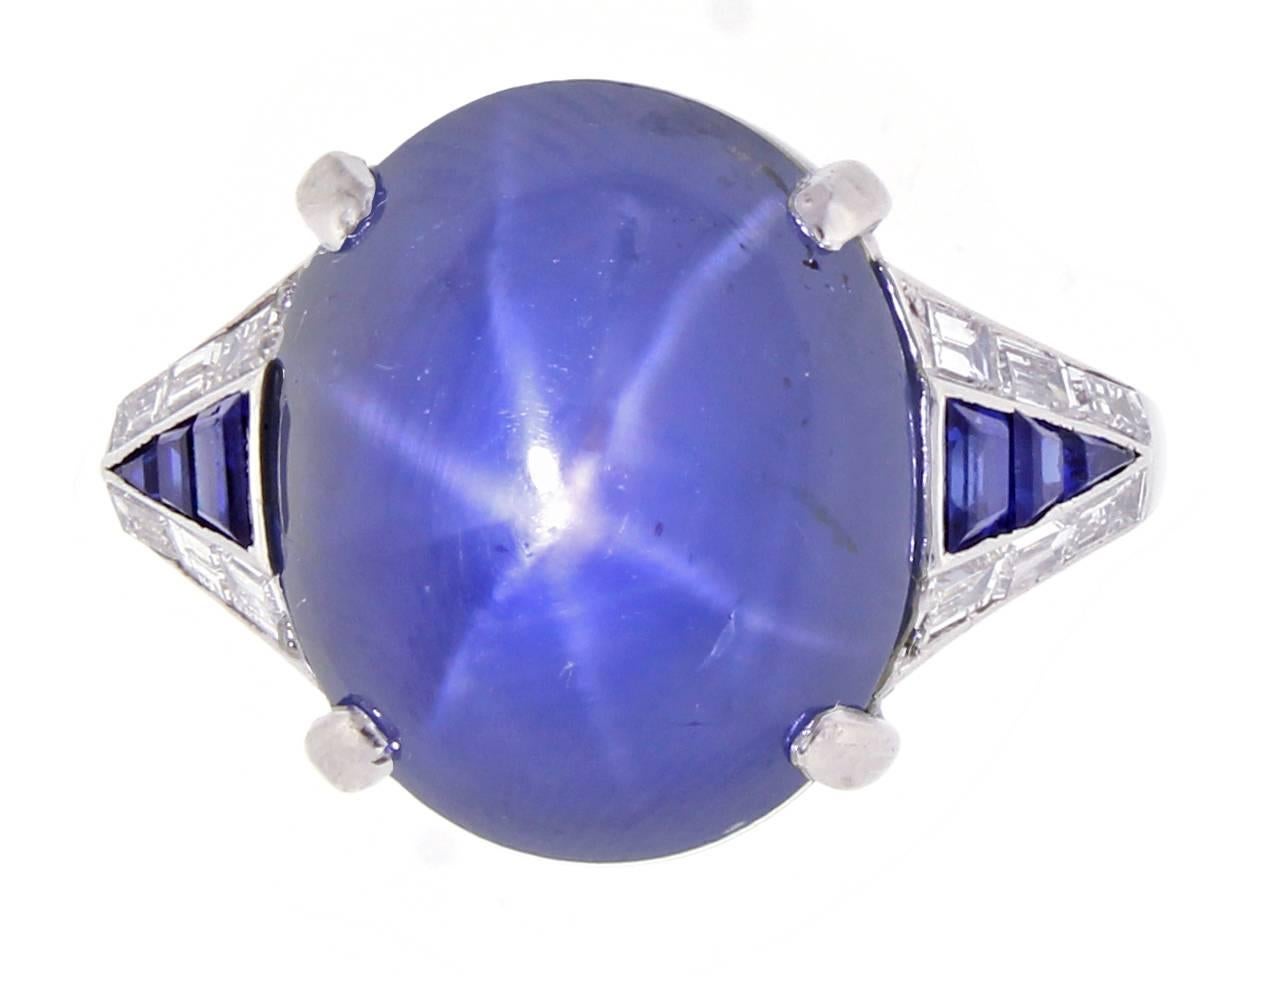 An incredible Art Deco Star sapphire ring from the New York jeweler Paul Gillot & Co. The central Star Sapphire weighs 24.02 carats and is accompanied by A.G.L certificate stating no heat enhancement and the country of origin is Sri